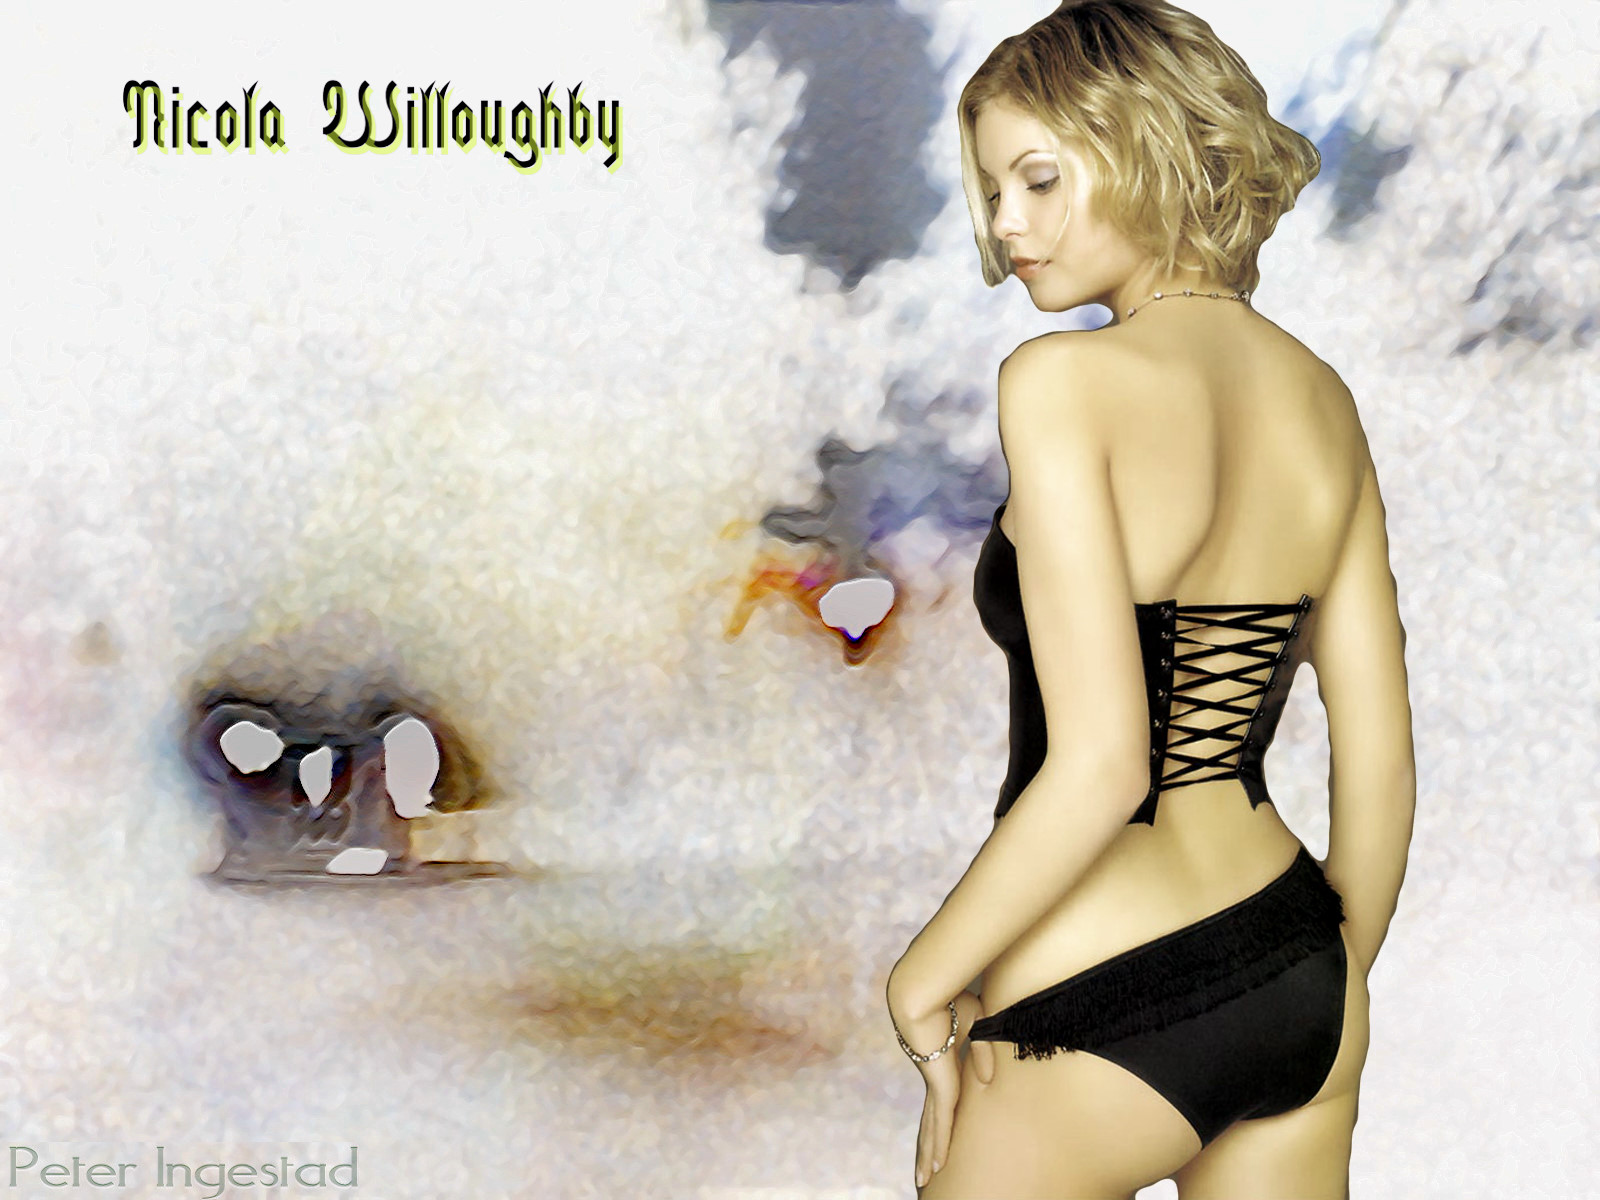 Nicola willoughby 2